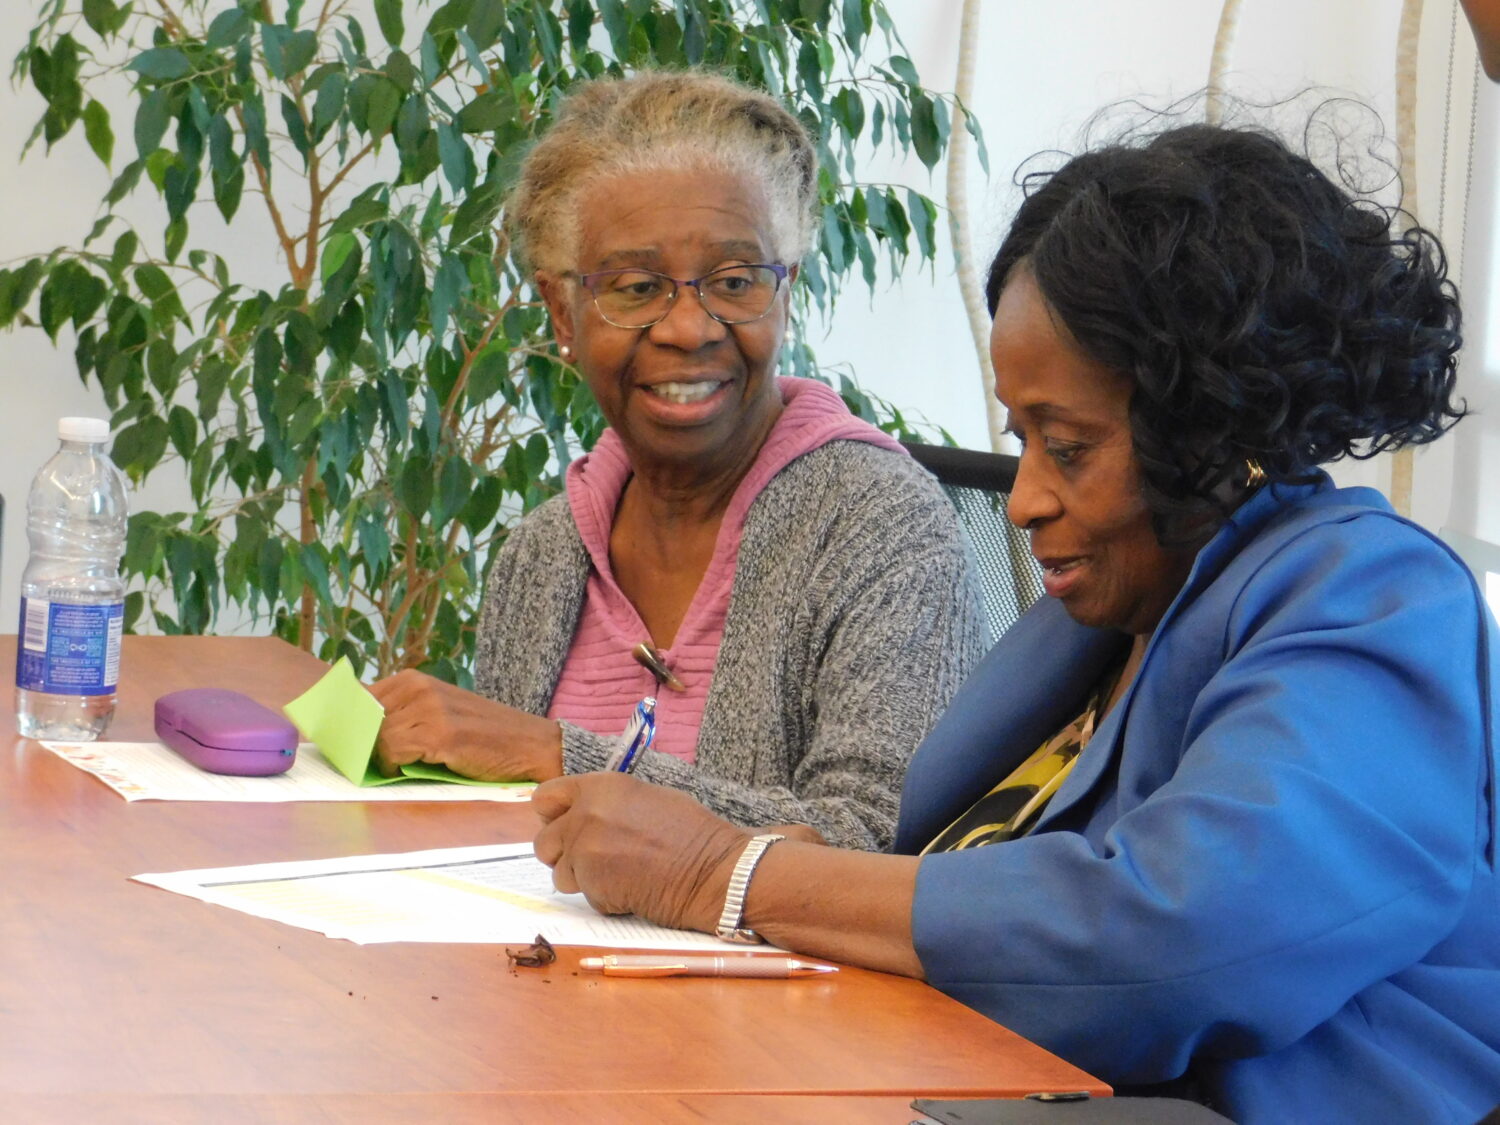 Two senior women of African American* descent. It’s a candid photo as neither woman seems to be aware of the camera. The one on the left has glasses and is wearing a pink sweater with a grey cardigan over it. The woman to the right is wearing a blue blazer and has a silver watch on her left wrist.